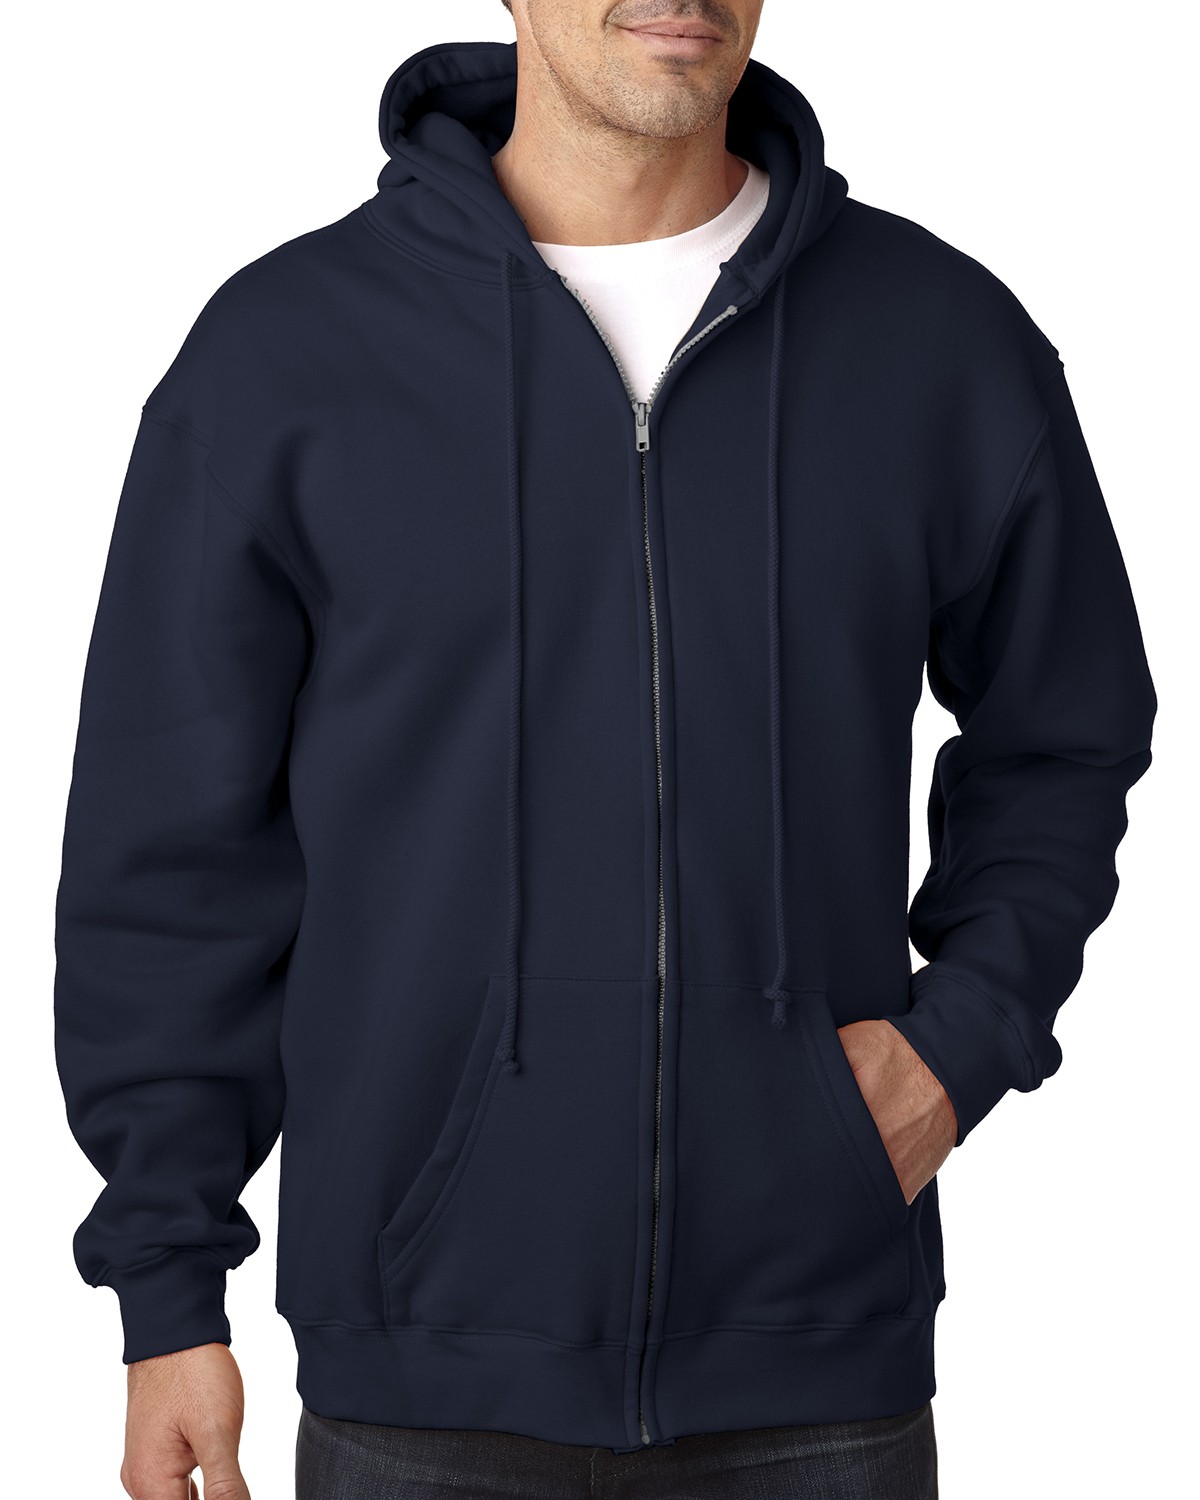 Bayside BA900 Adult 9.5Oz., 80% Cotton/20% Polyester Full-Zip Hooded ...